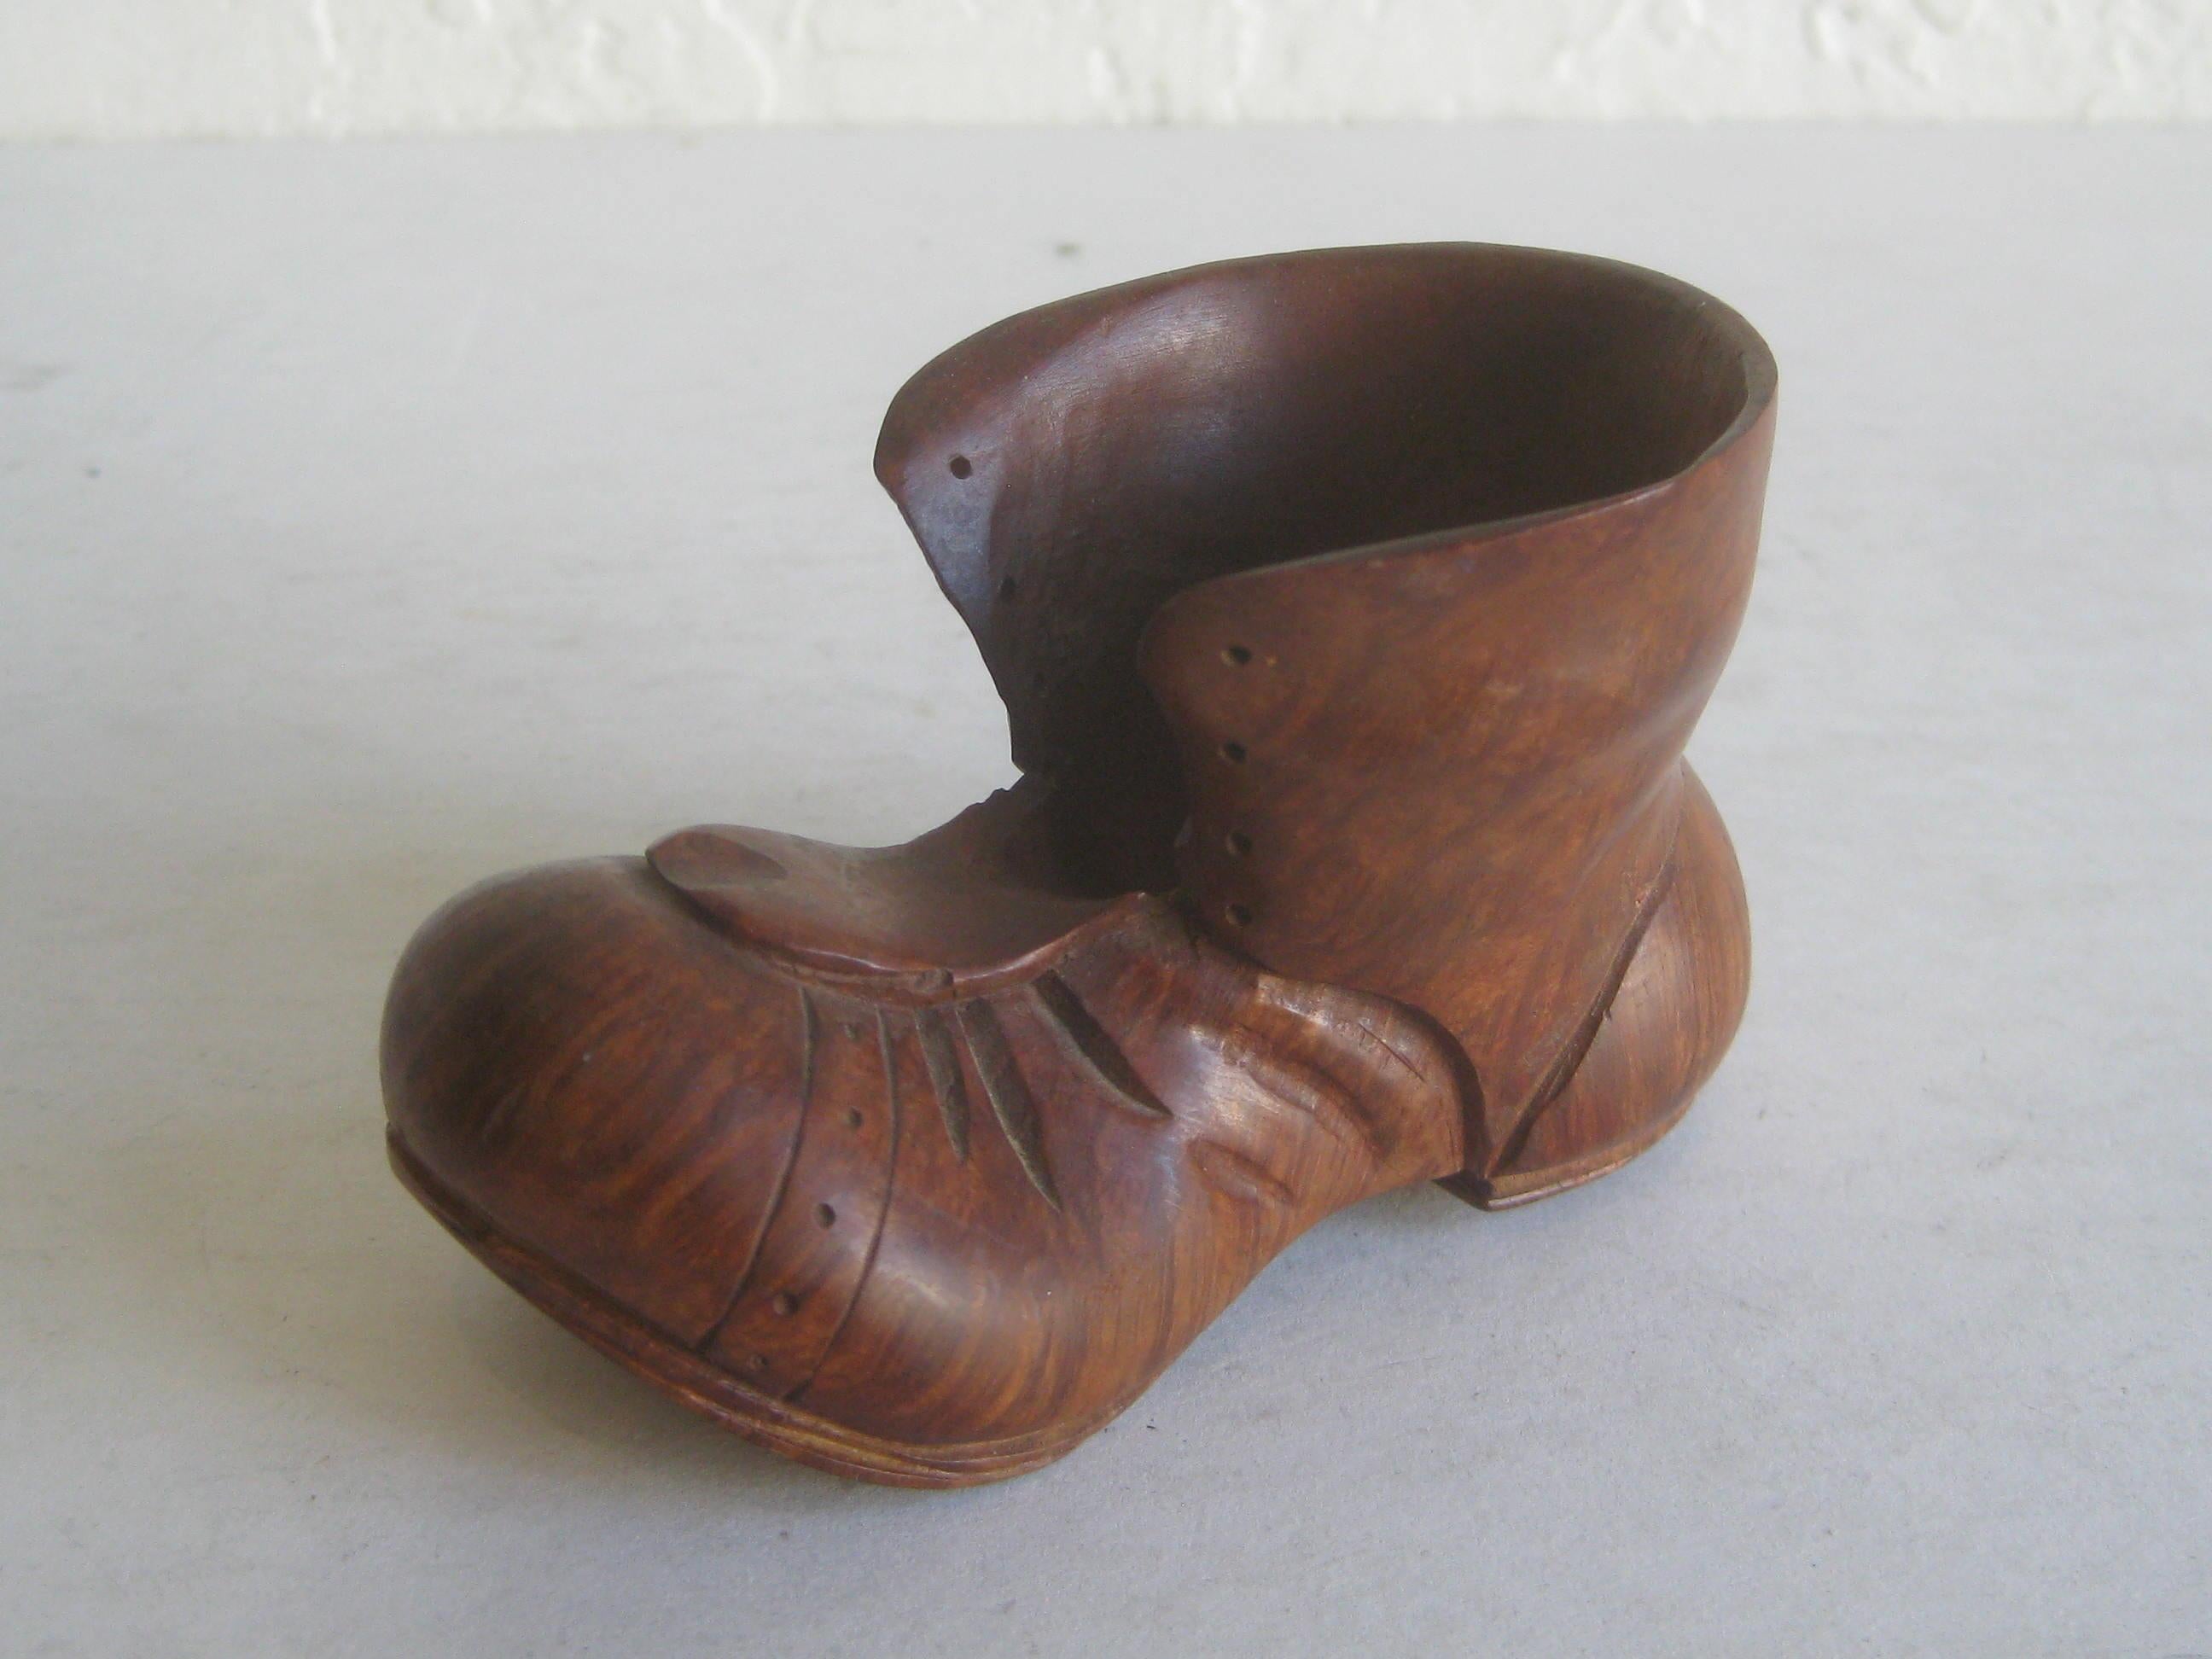 Beautiful antique French hand carved burl wood figural boot/shoe pipe stand or holder. Made in France and is marked on the bottom. High quality and carved well. Burl has wonderful color and grain. Very nice piece. Measures approximate: 3 3/4